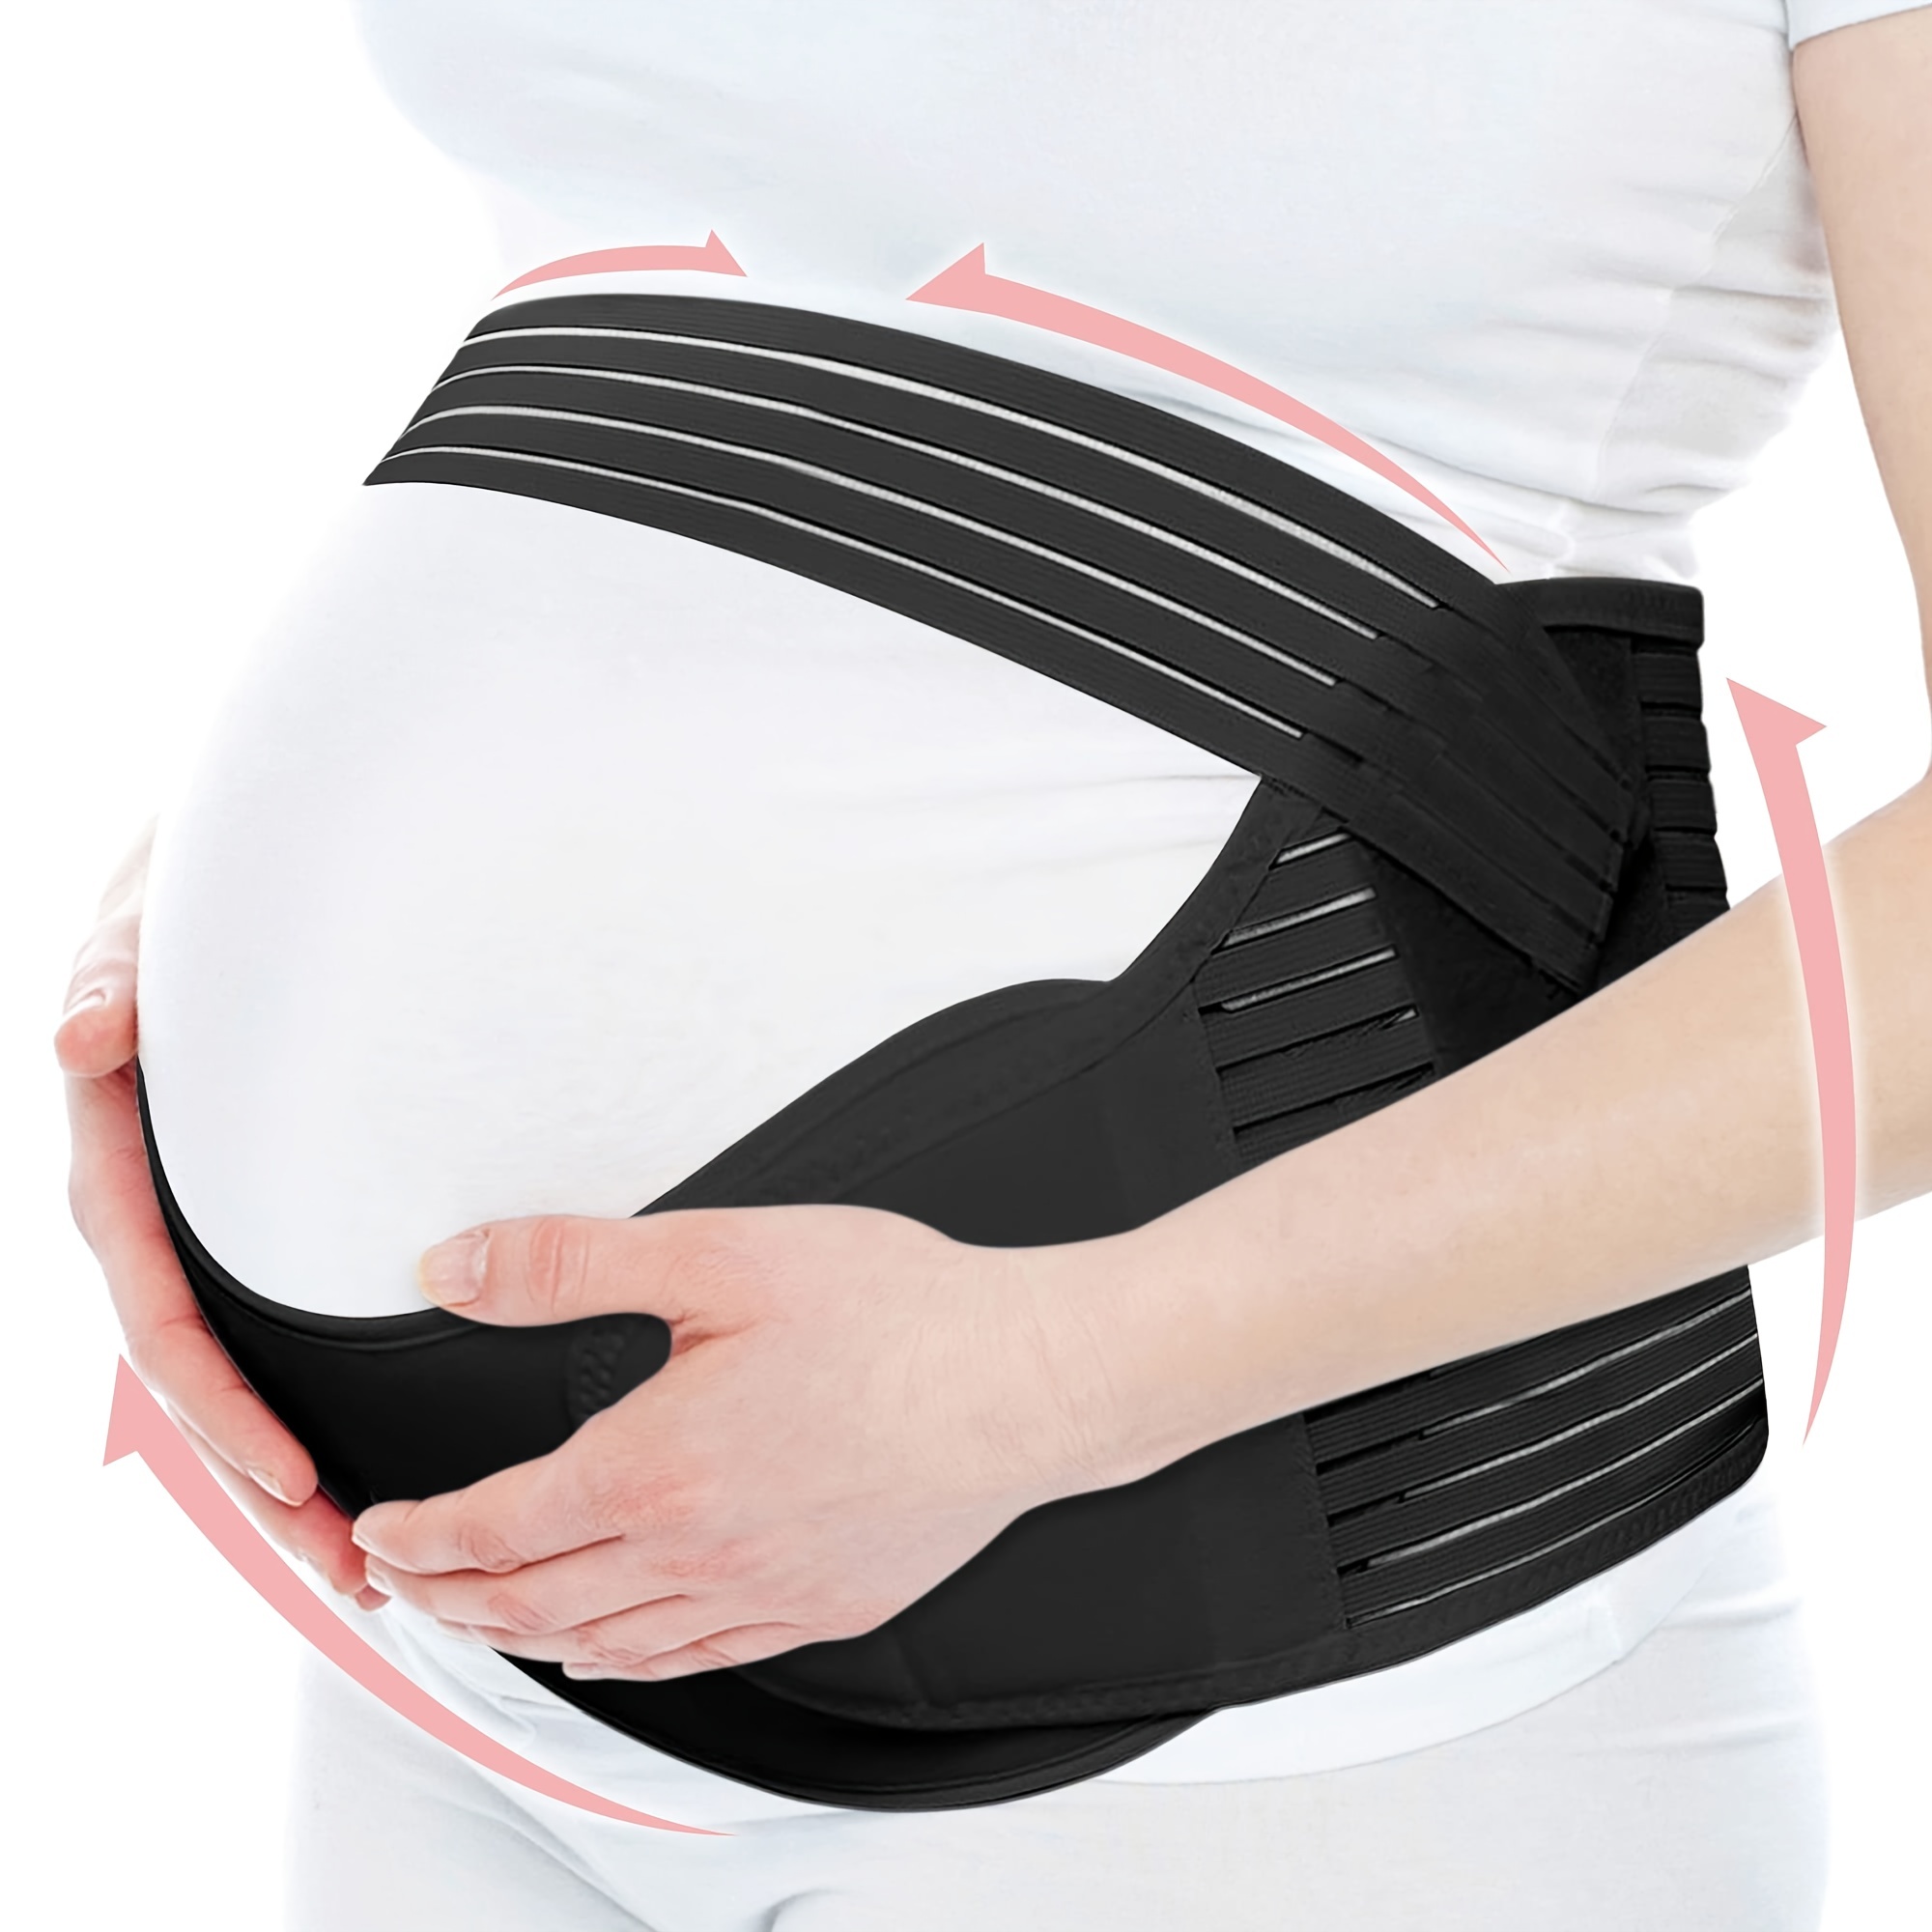 Maternity Belt, Pregnancy Support Belt, Back Support Protection, Breathable  Belly Band That Provides Hip, Pelvic, Lumbar and Lower Back Pain Relief